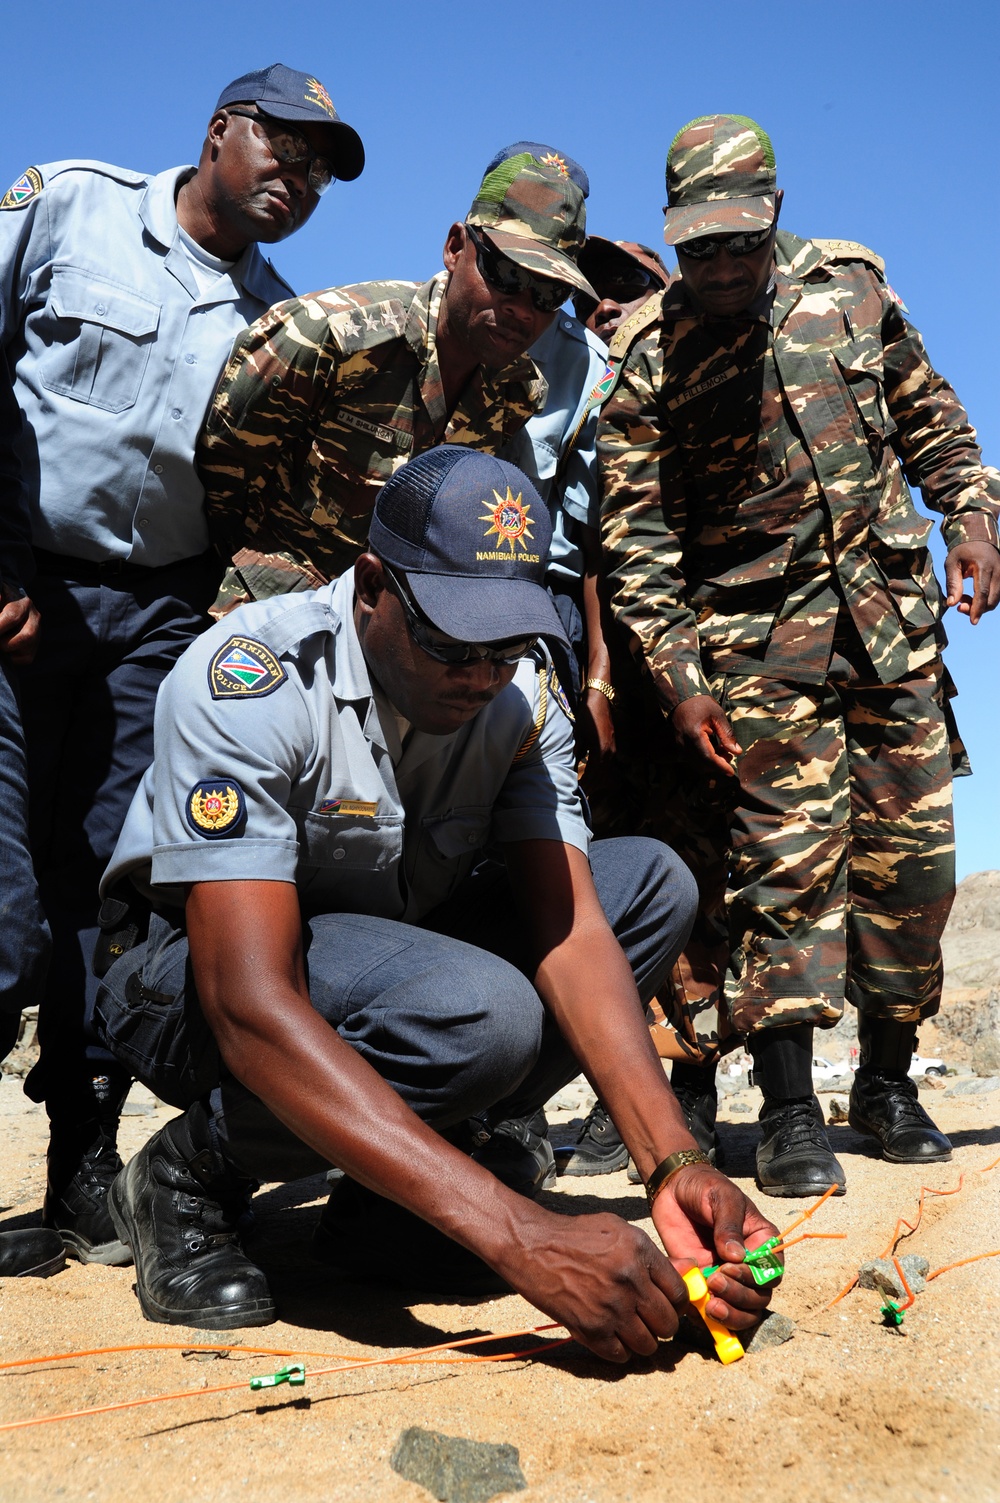 U.S. Navy, Namibian Forces Share Explosive Safety Skill